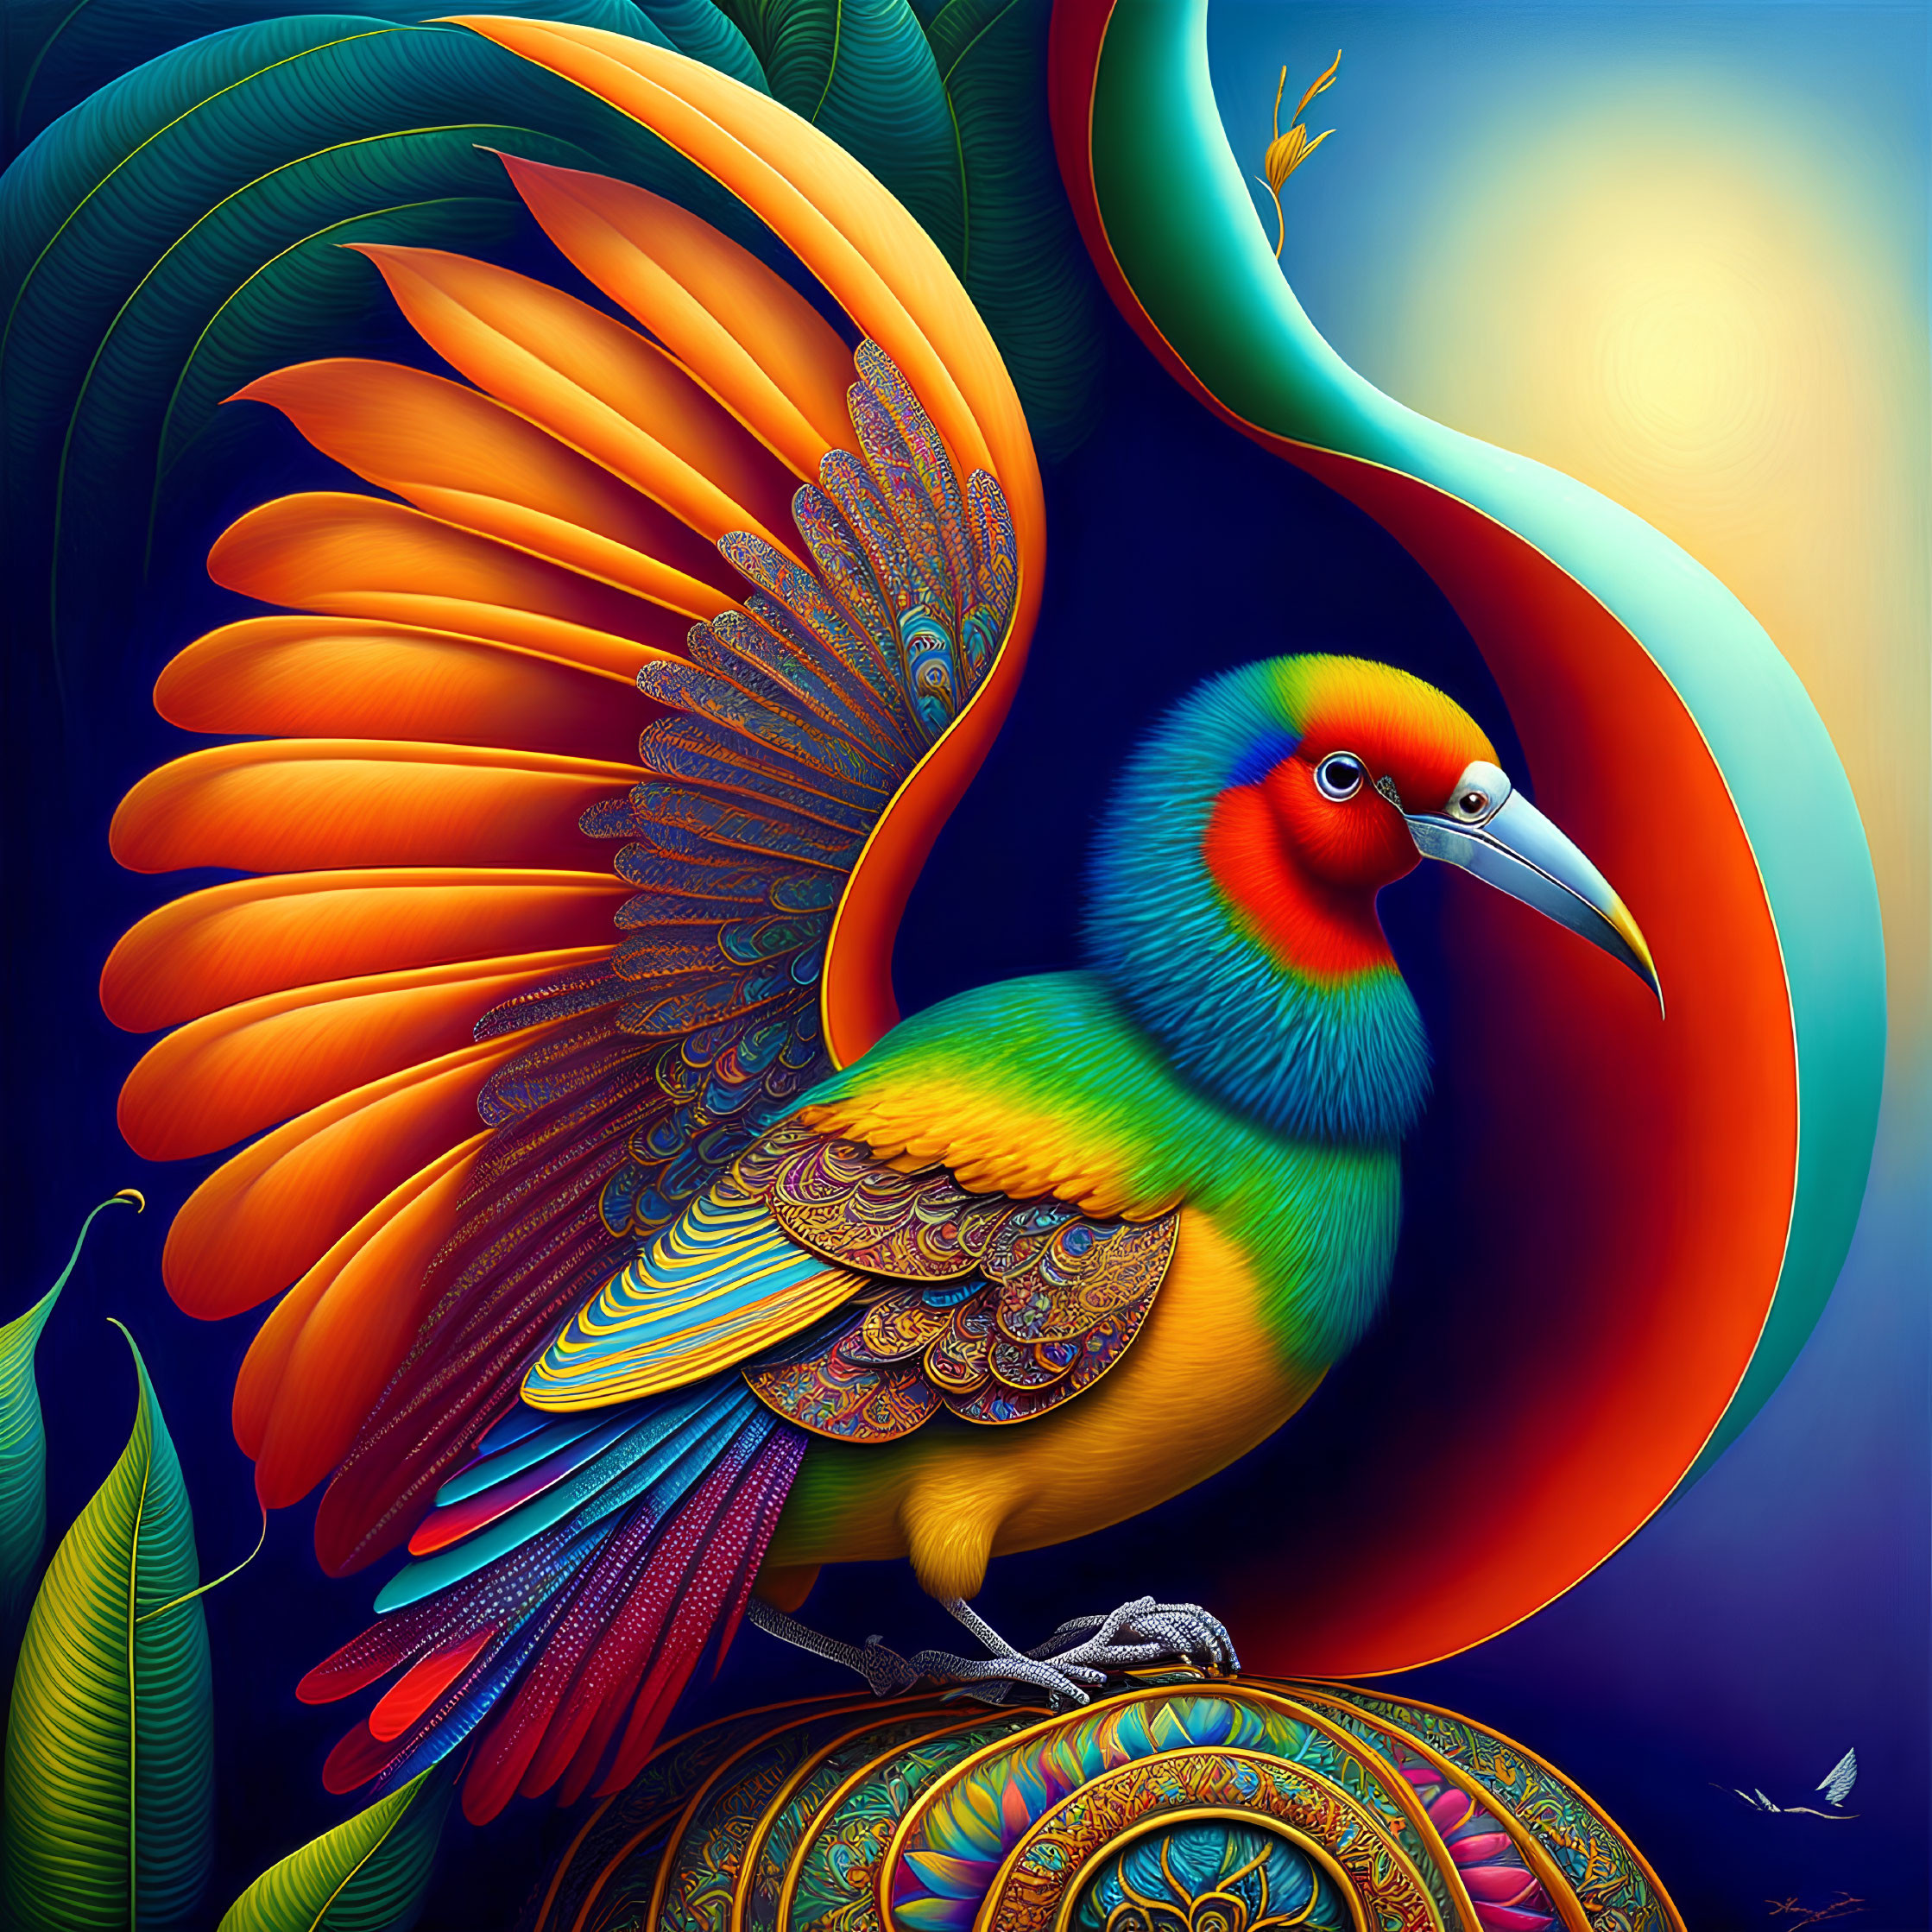 Colorful Stylized Bird with Expansive Tail on Ornate Design against Twilight Sky